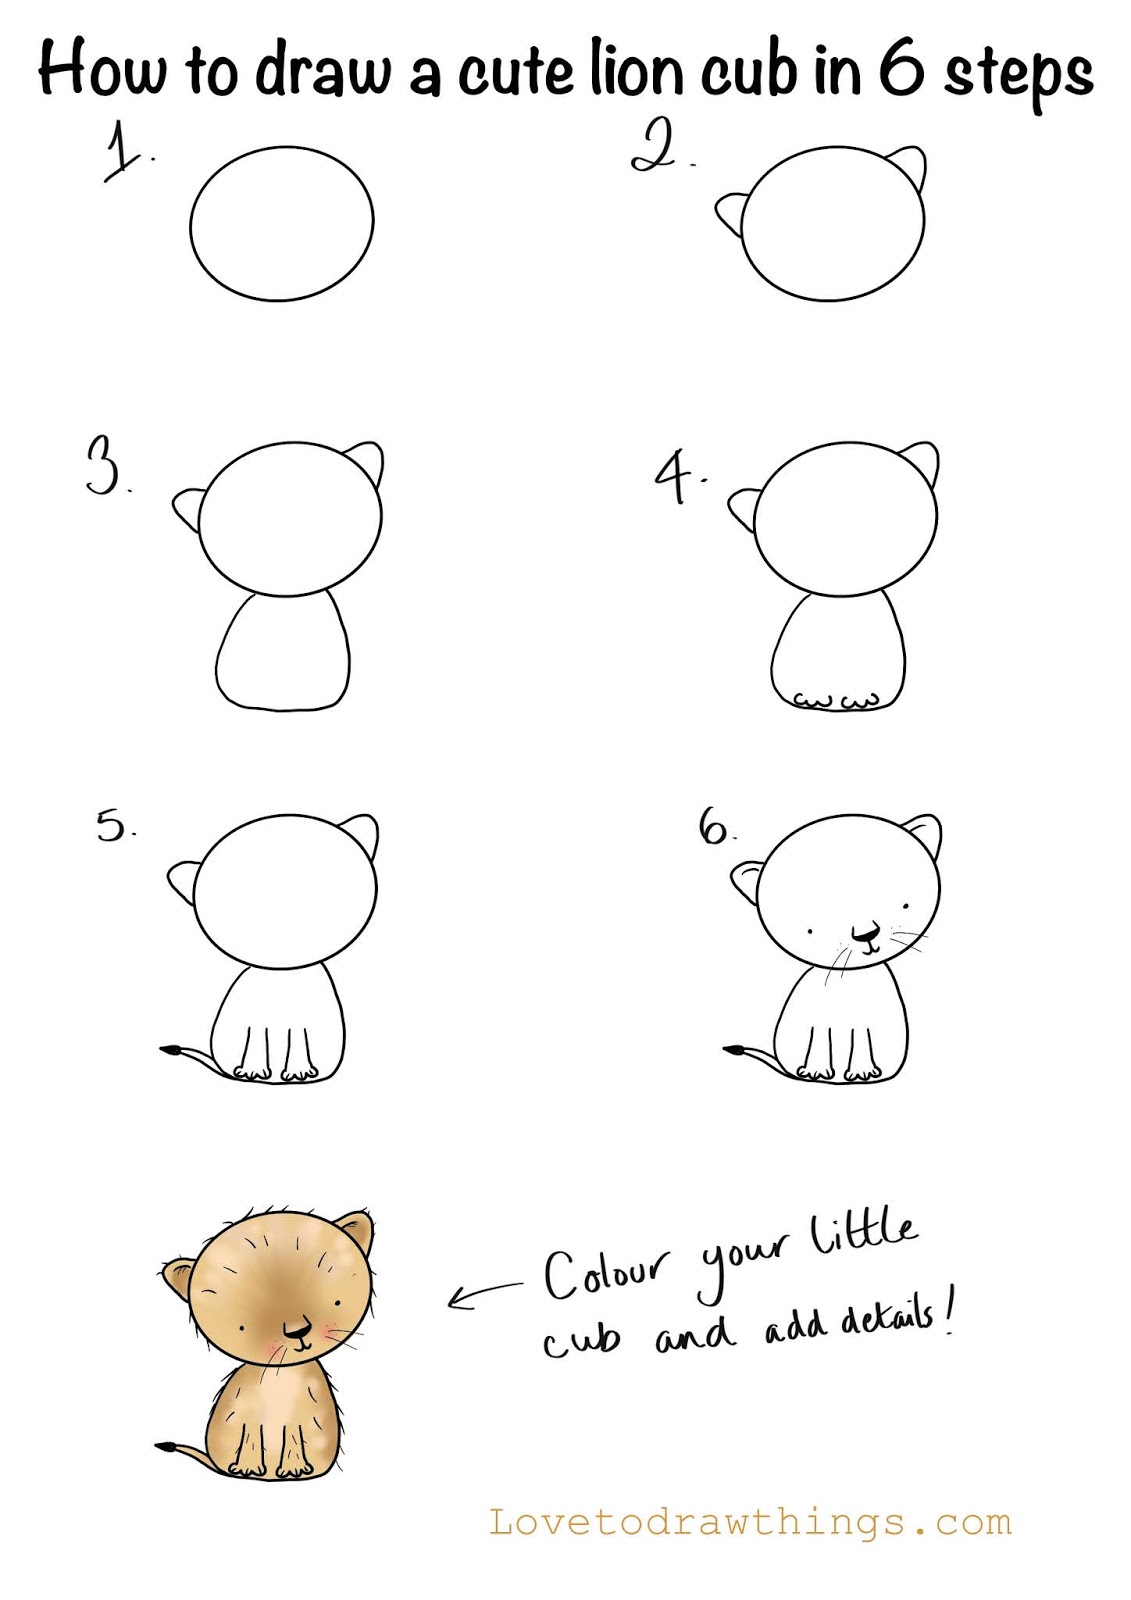 How to draw a cute lion cub in 6 steps